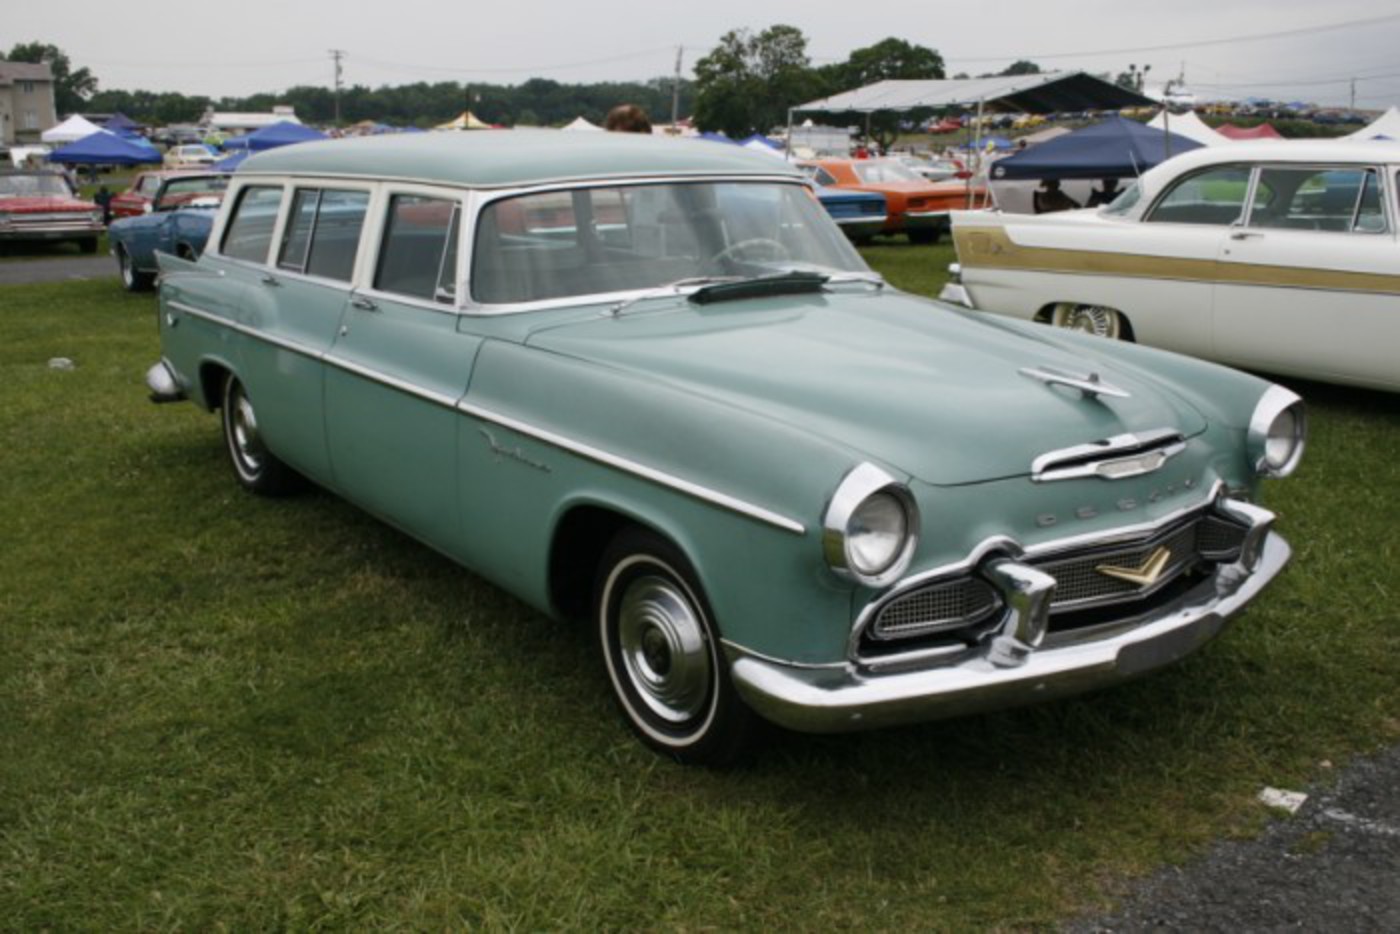 De Soto Model K Wagon Photo Gallery: Photo #11 out of 6, Image ...